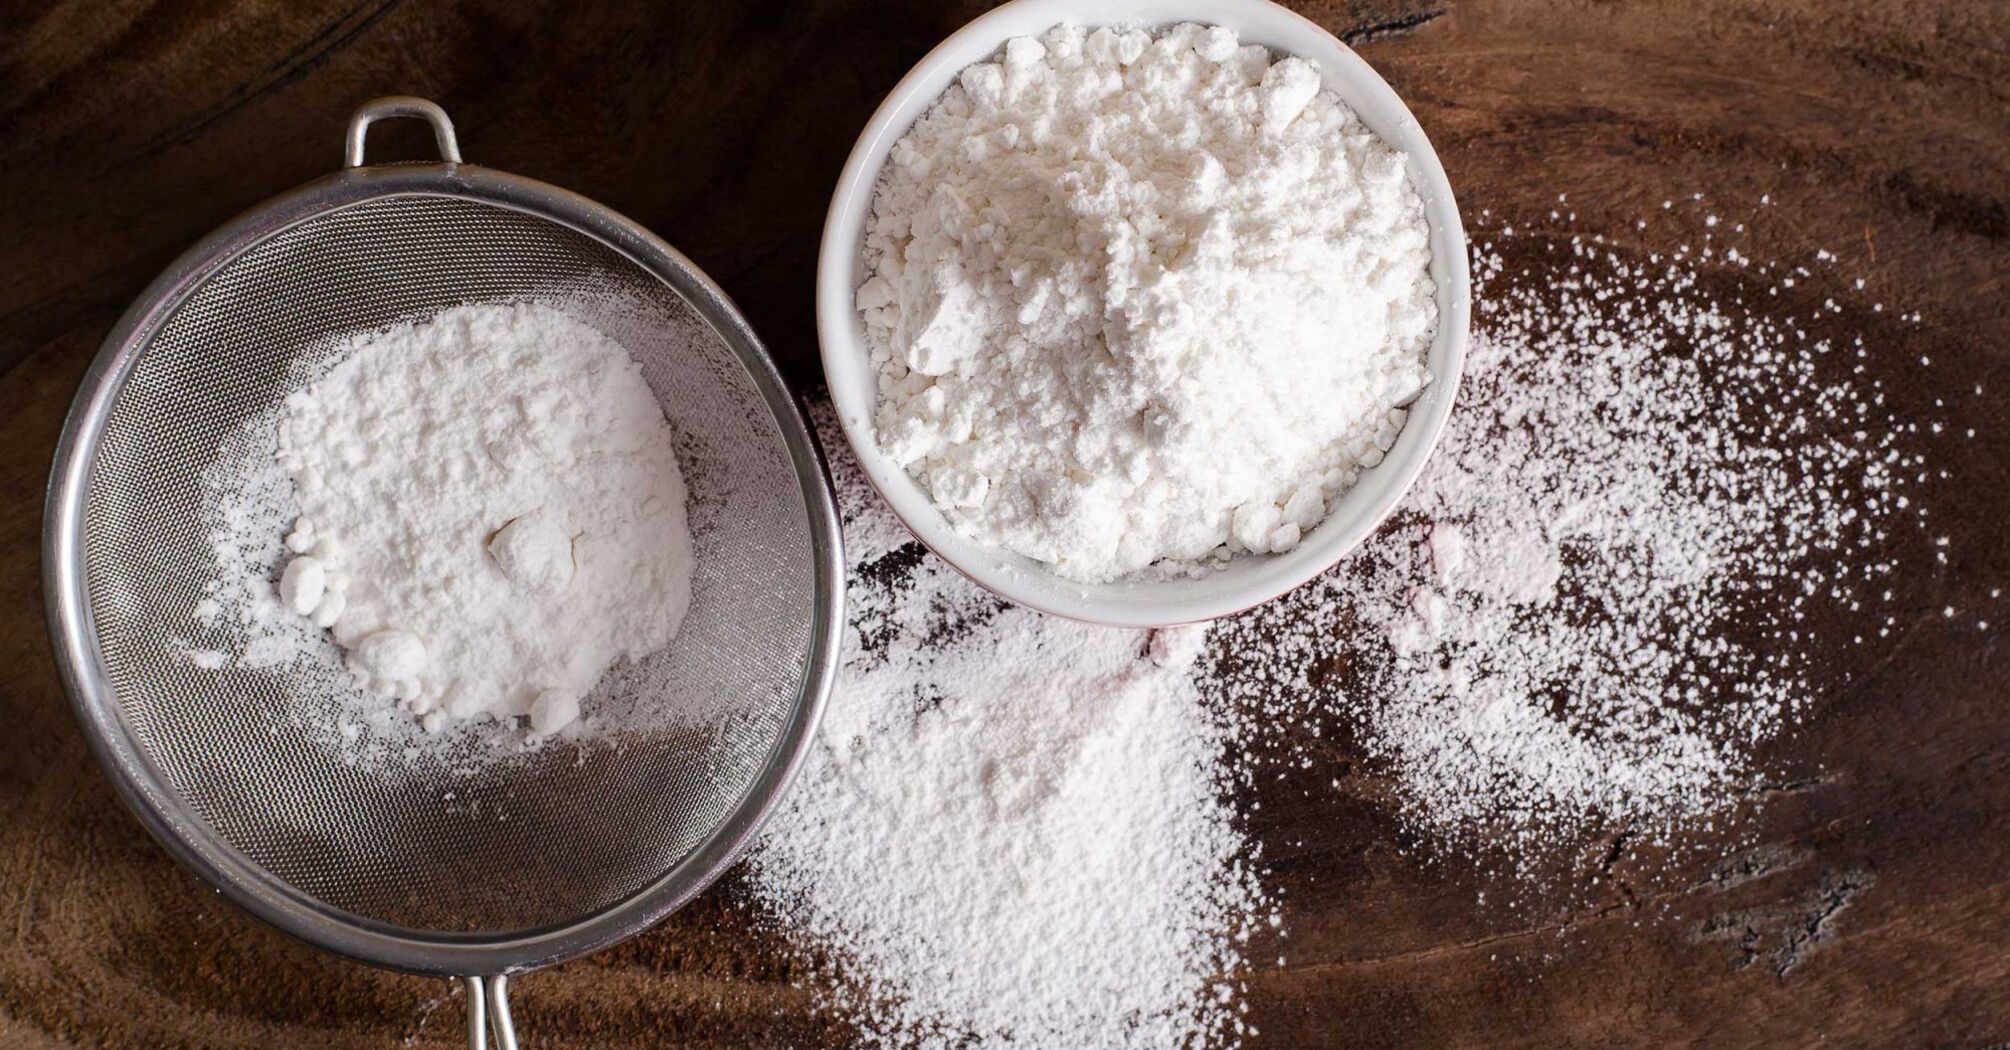 How to use spoiled flour